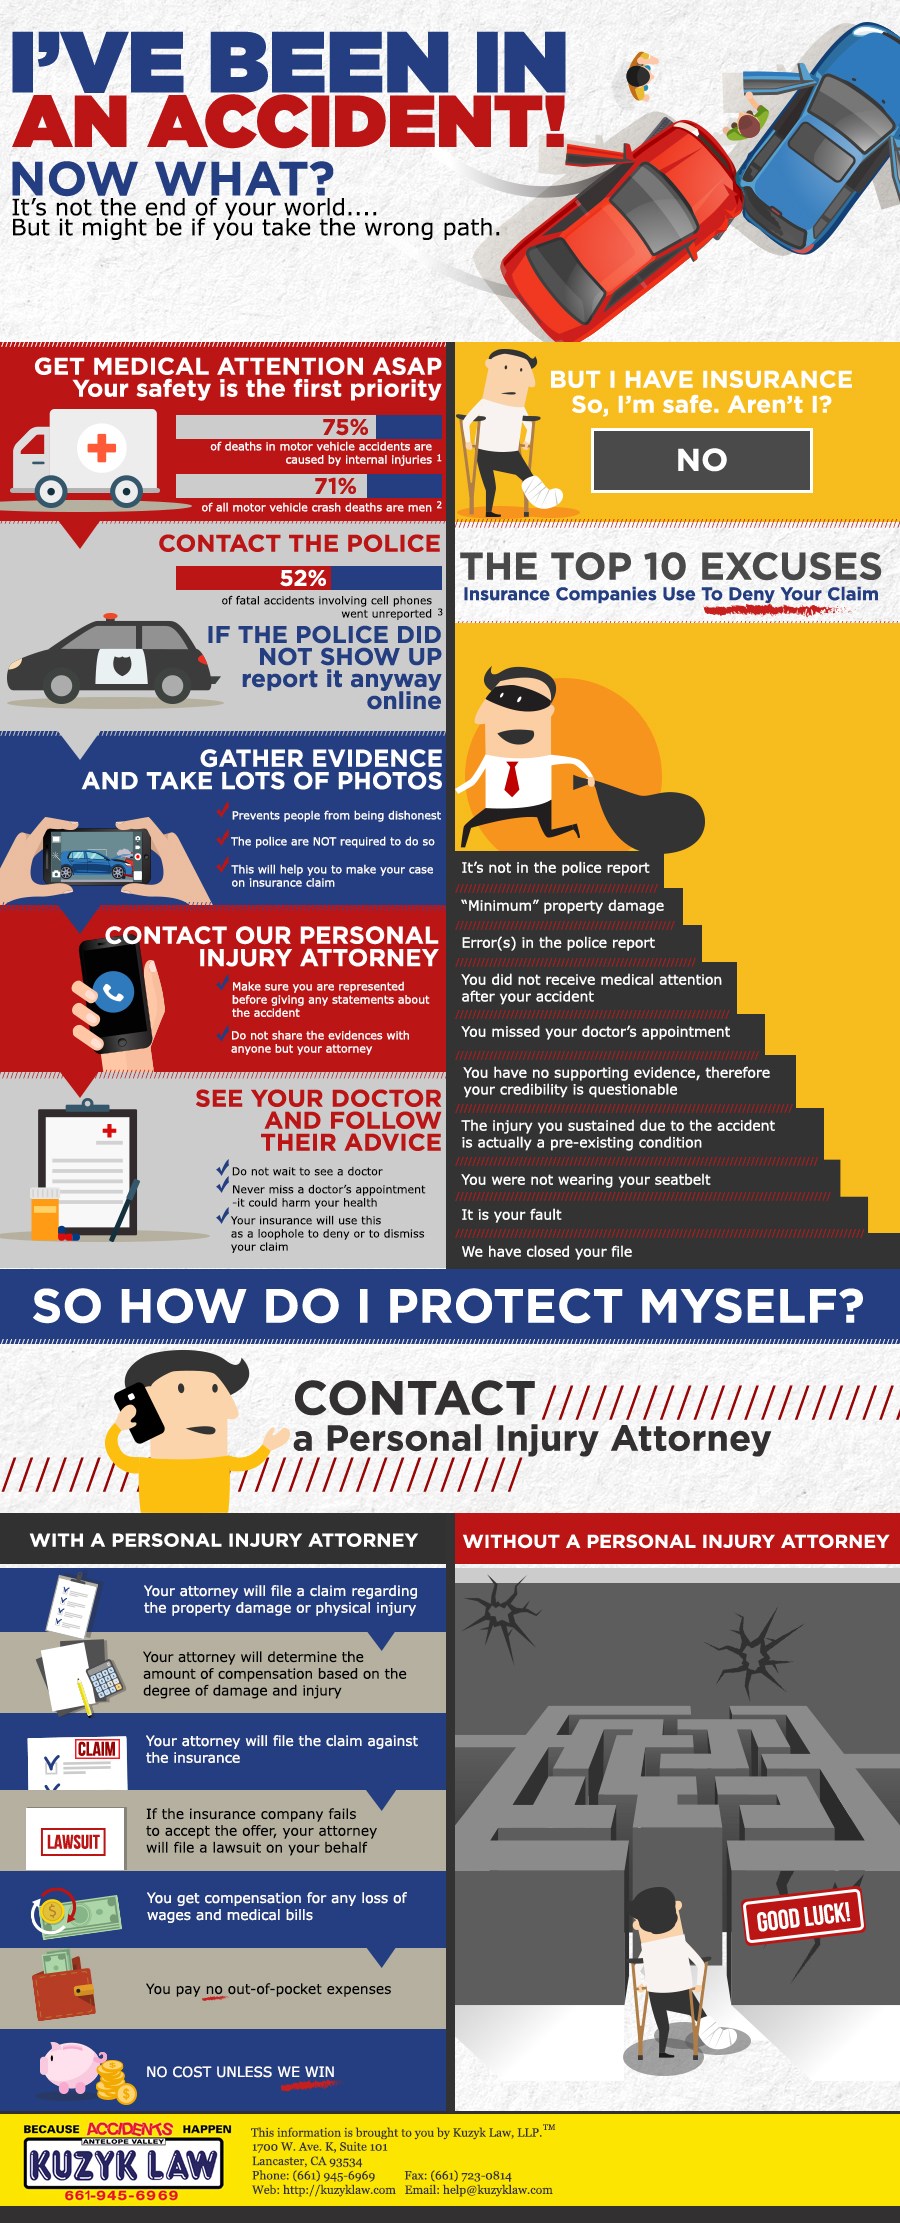 I've Been In An Accident! Now What? (Personal Injury Attorney Infographic)